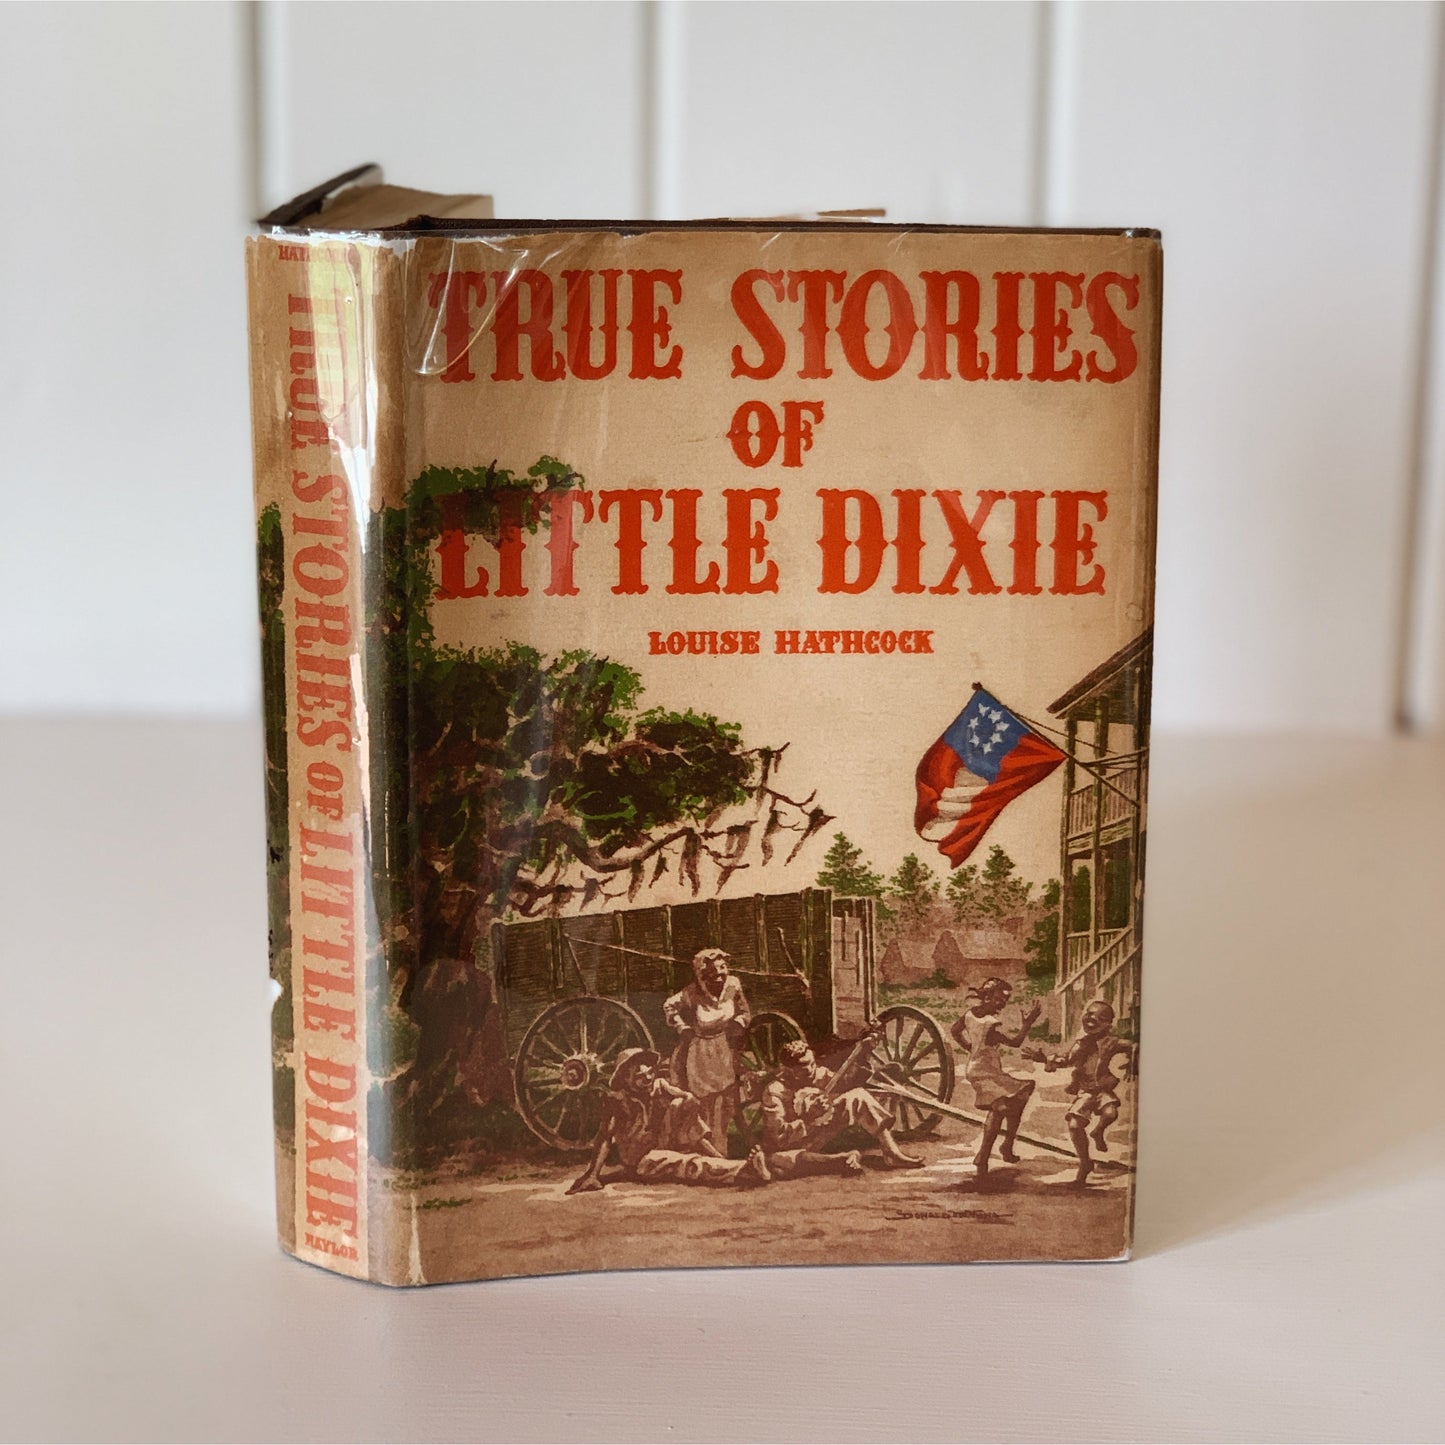 True Stories of Little Dixie, 1962, Hardcover Folklore and History of the South